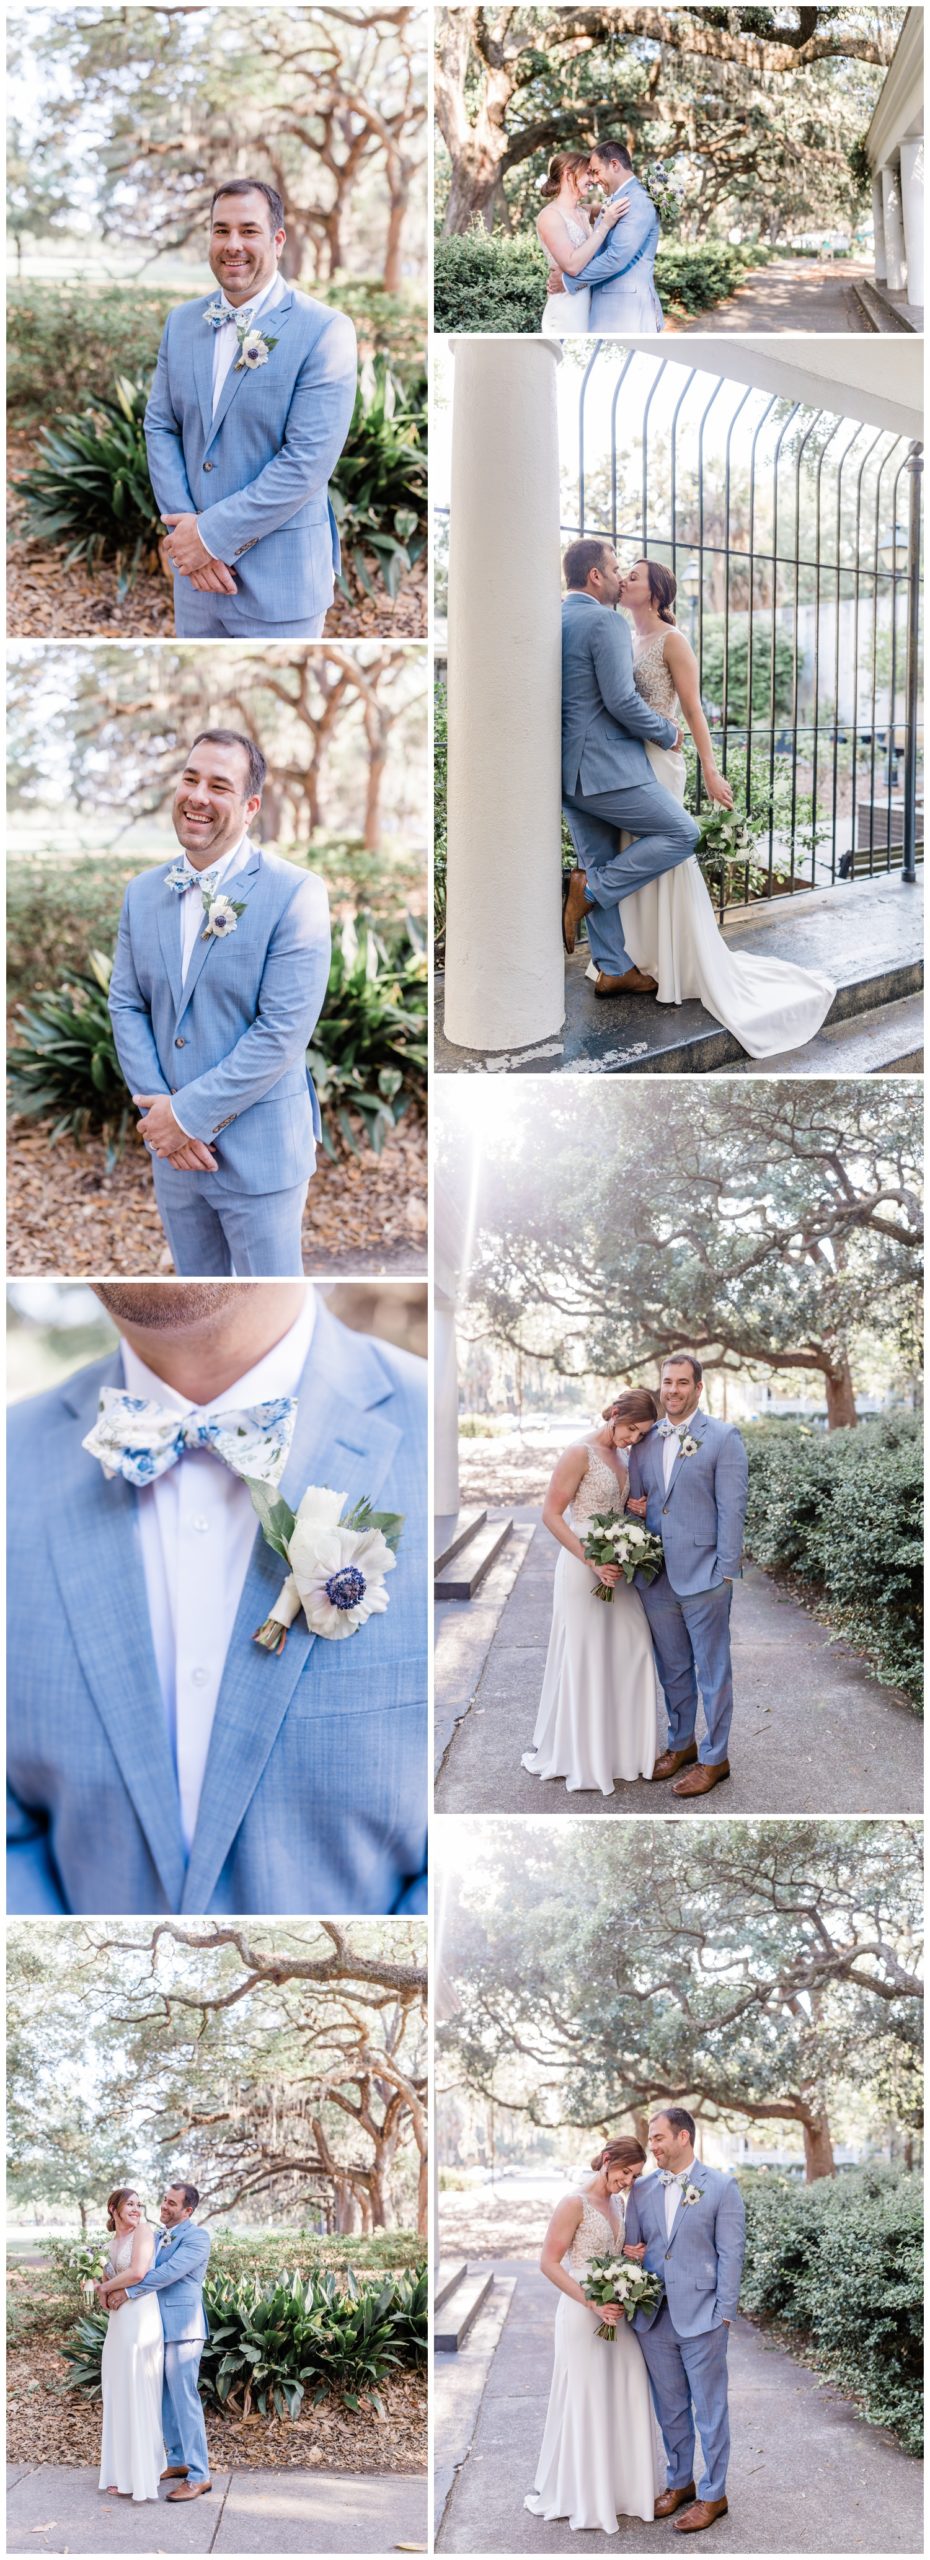 Classic Elopement in Forsyth Park - rachel + charles - make up and hair by royal makeup and hair - taylor brown photography